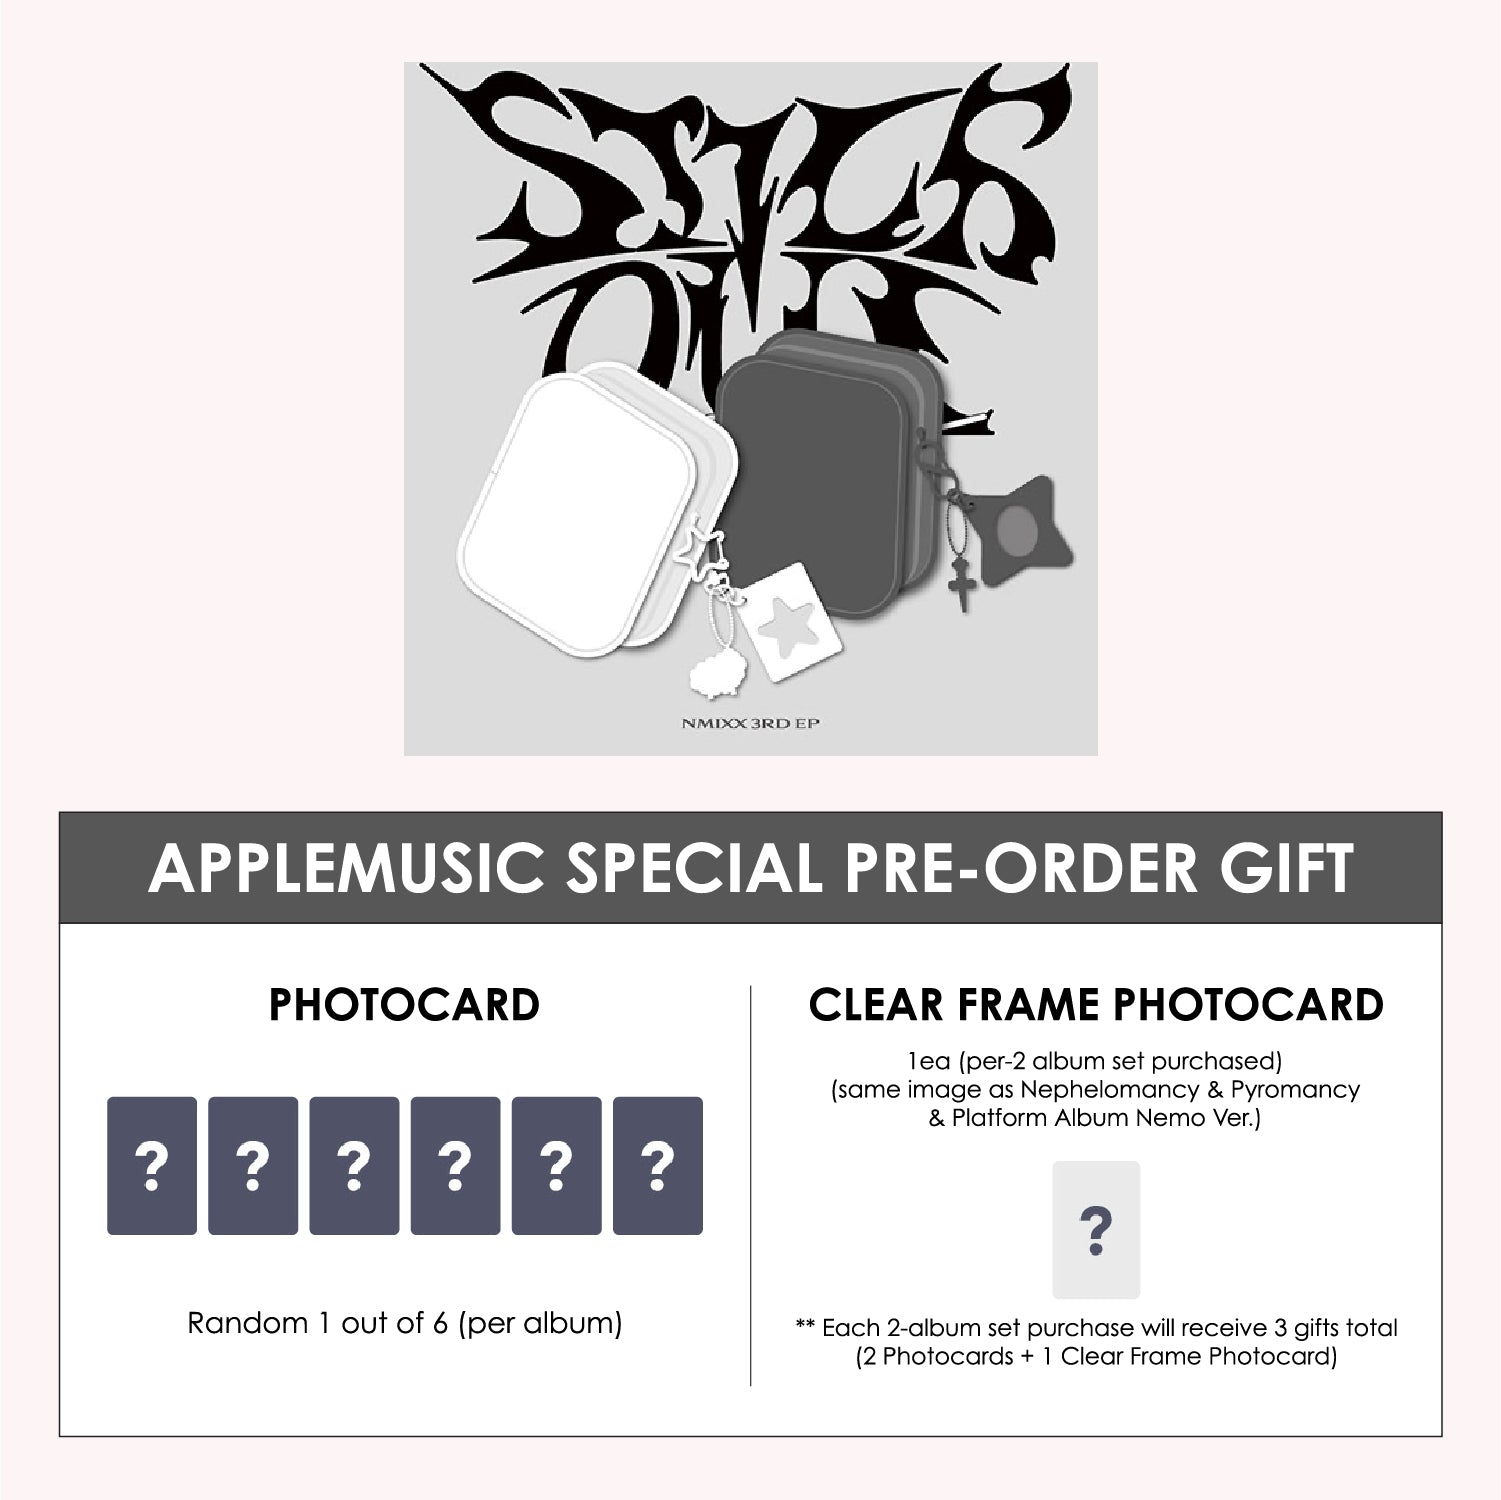 NMIXX 3RD EP ALBUM - FE304: STICK OUT (LIMITED VER.) + APPLEMUSIC PHOTOCARD (PRE-ORDER)